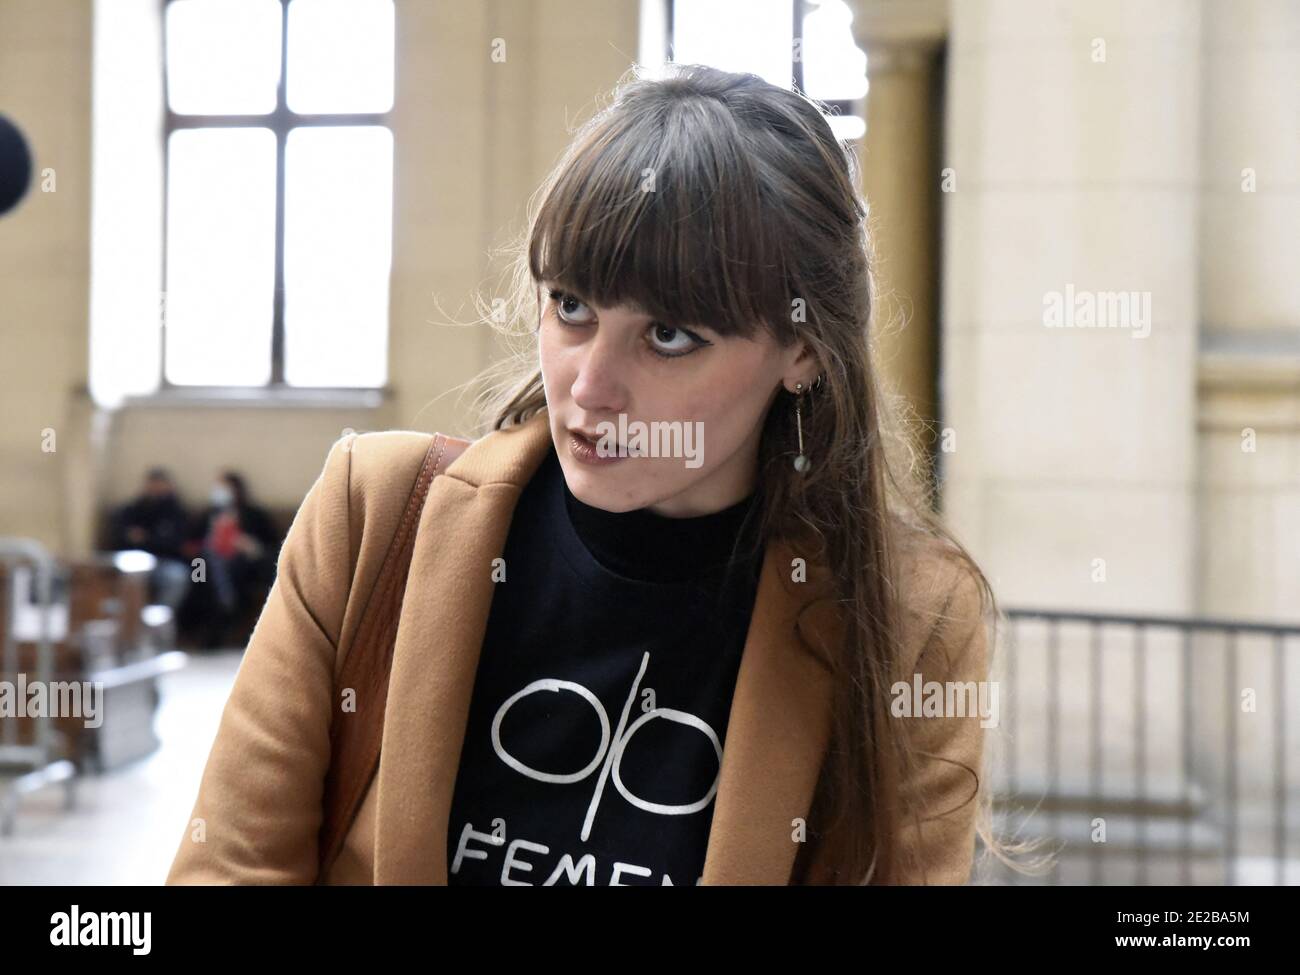 Paris, France. 13th Jan 2021. Femen member Clemence at the Court of Appeal during her trial for the Femen protest at the Arc de Triomphe, at the' courthouse in Paris, France, on January 13, 2021. Photo by Patrice Pierrot/Avenir Pictures/ABACAPRESS.COM Credit: Abaca Press/Alamy Live News Stock Photo